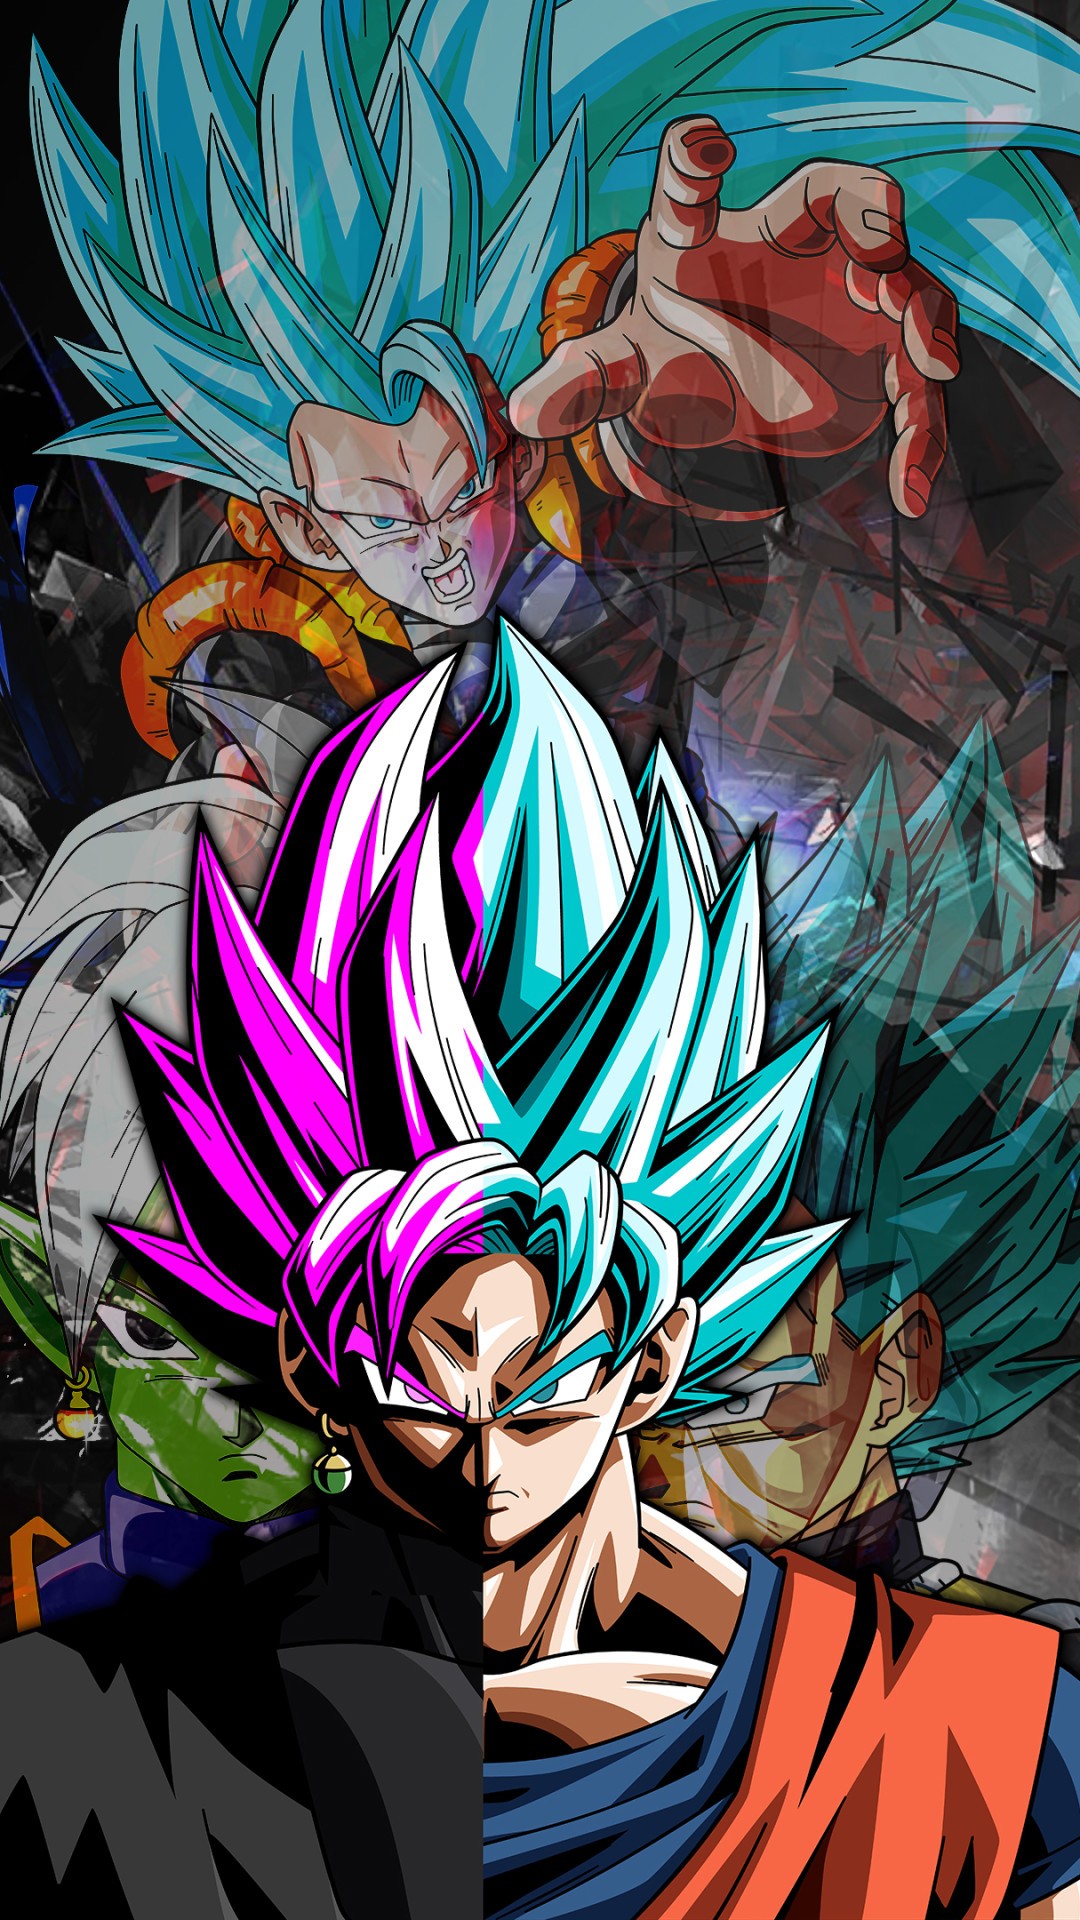 Wallpaper iPhone Black Goku with resolution 1080X1920 pixel. You can make this wallpaper for your iPhone 5, 6, 7, 8, X backgrounds, Mobile Screensaver, or iPad Lock Screen